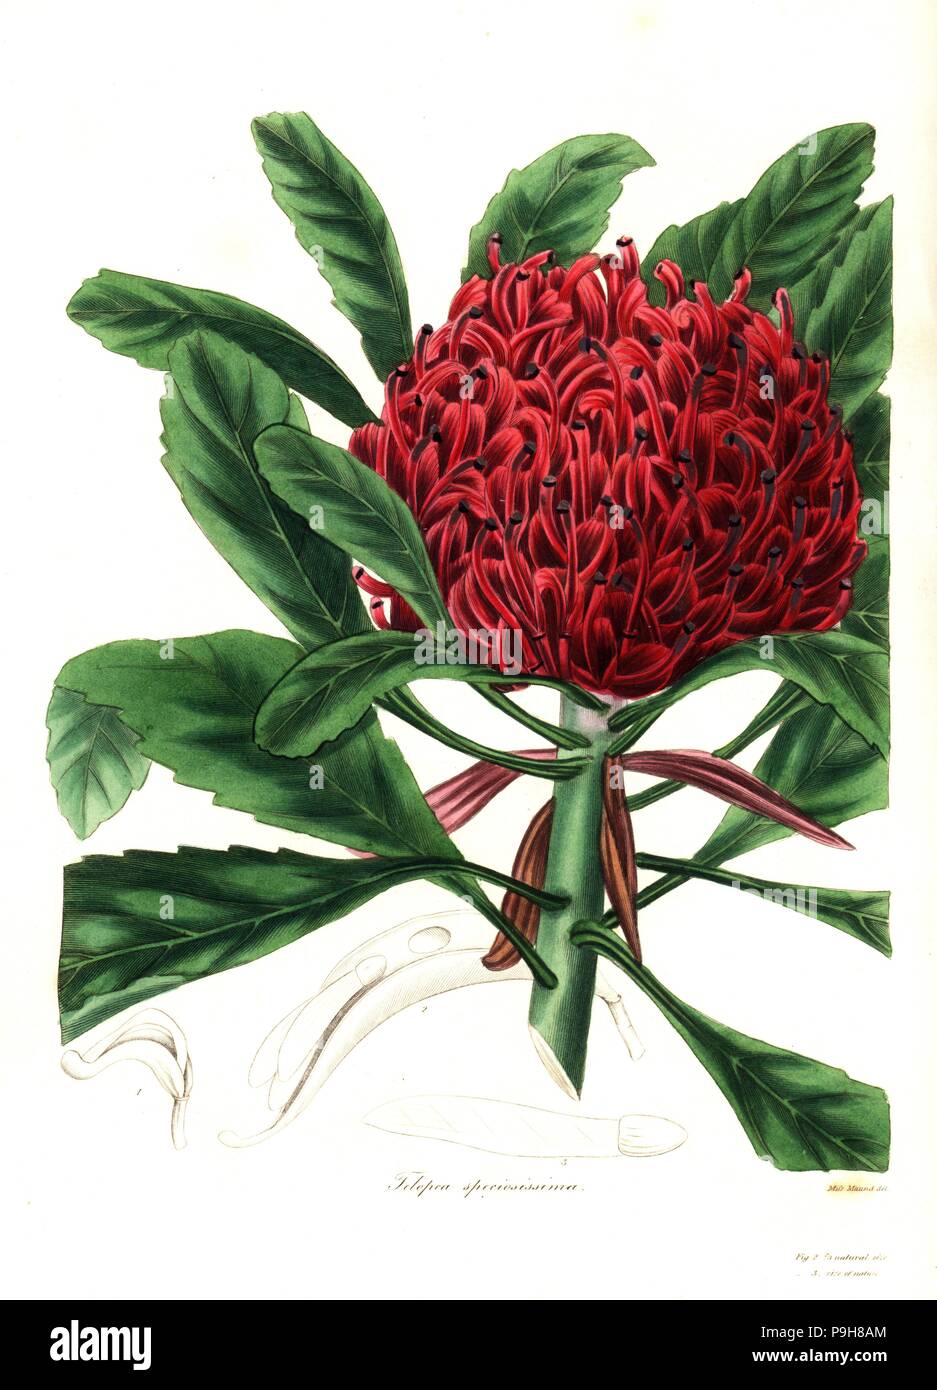 New South Wales waratah or most showy telopea, Telopea speciossima. Handcoloured copperplate engraving after a botanical illustration by Miss Maund from Benjamin Maund and the Rev. John Stevens Henslow's The Botanist, London, 1836. Stock Photo